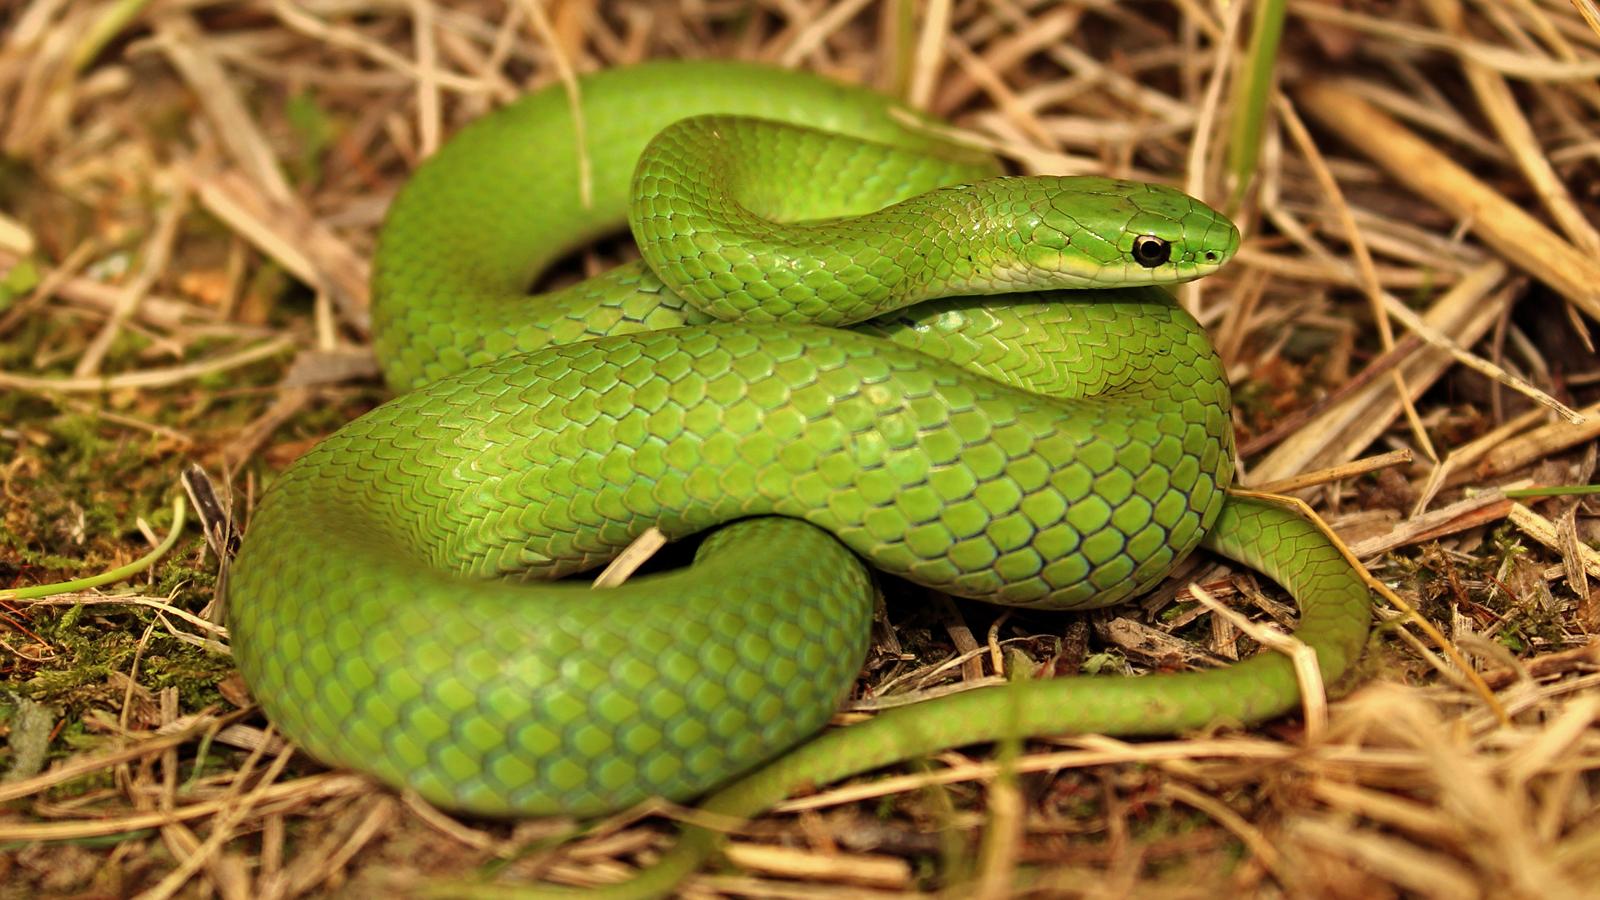 are most snakes poisonous